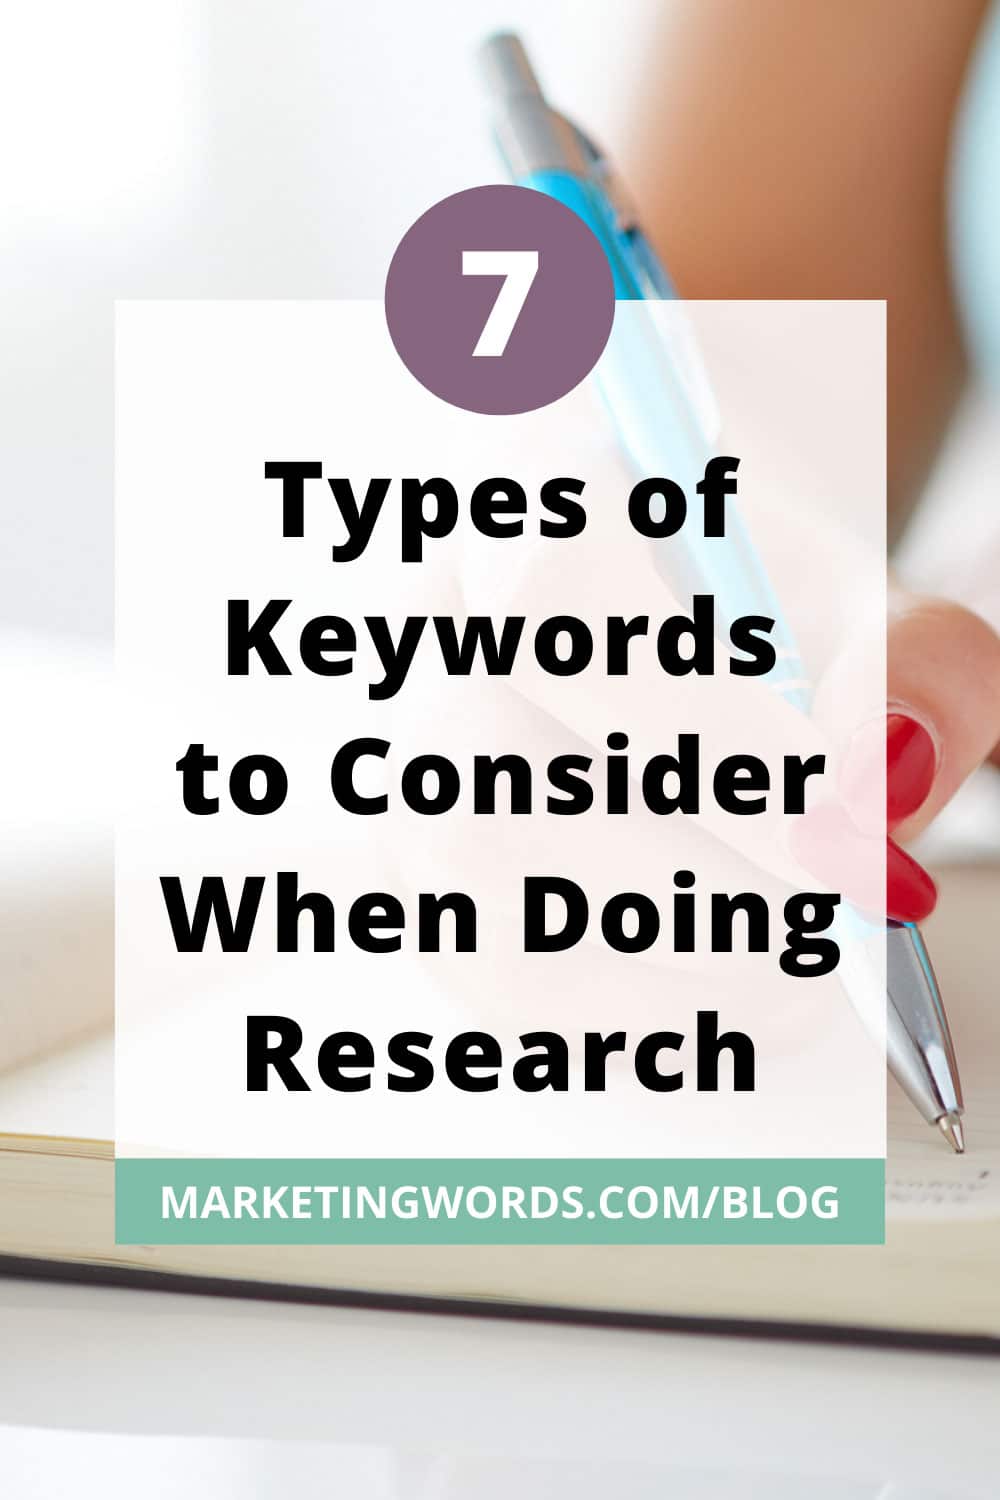 7 Types of Keywords to Consider When Doing Research